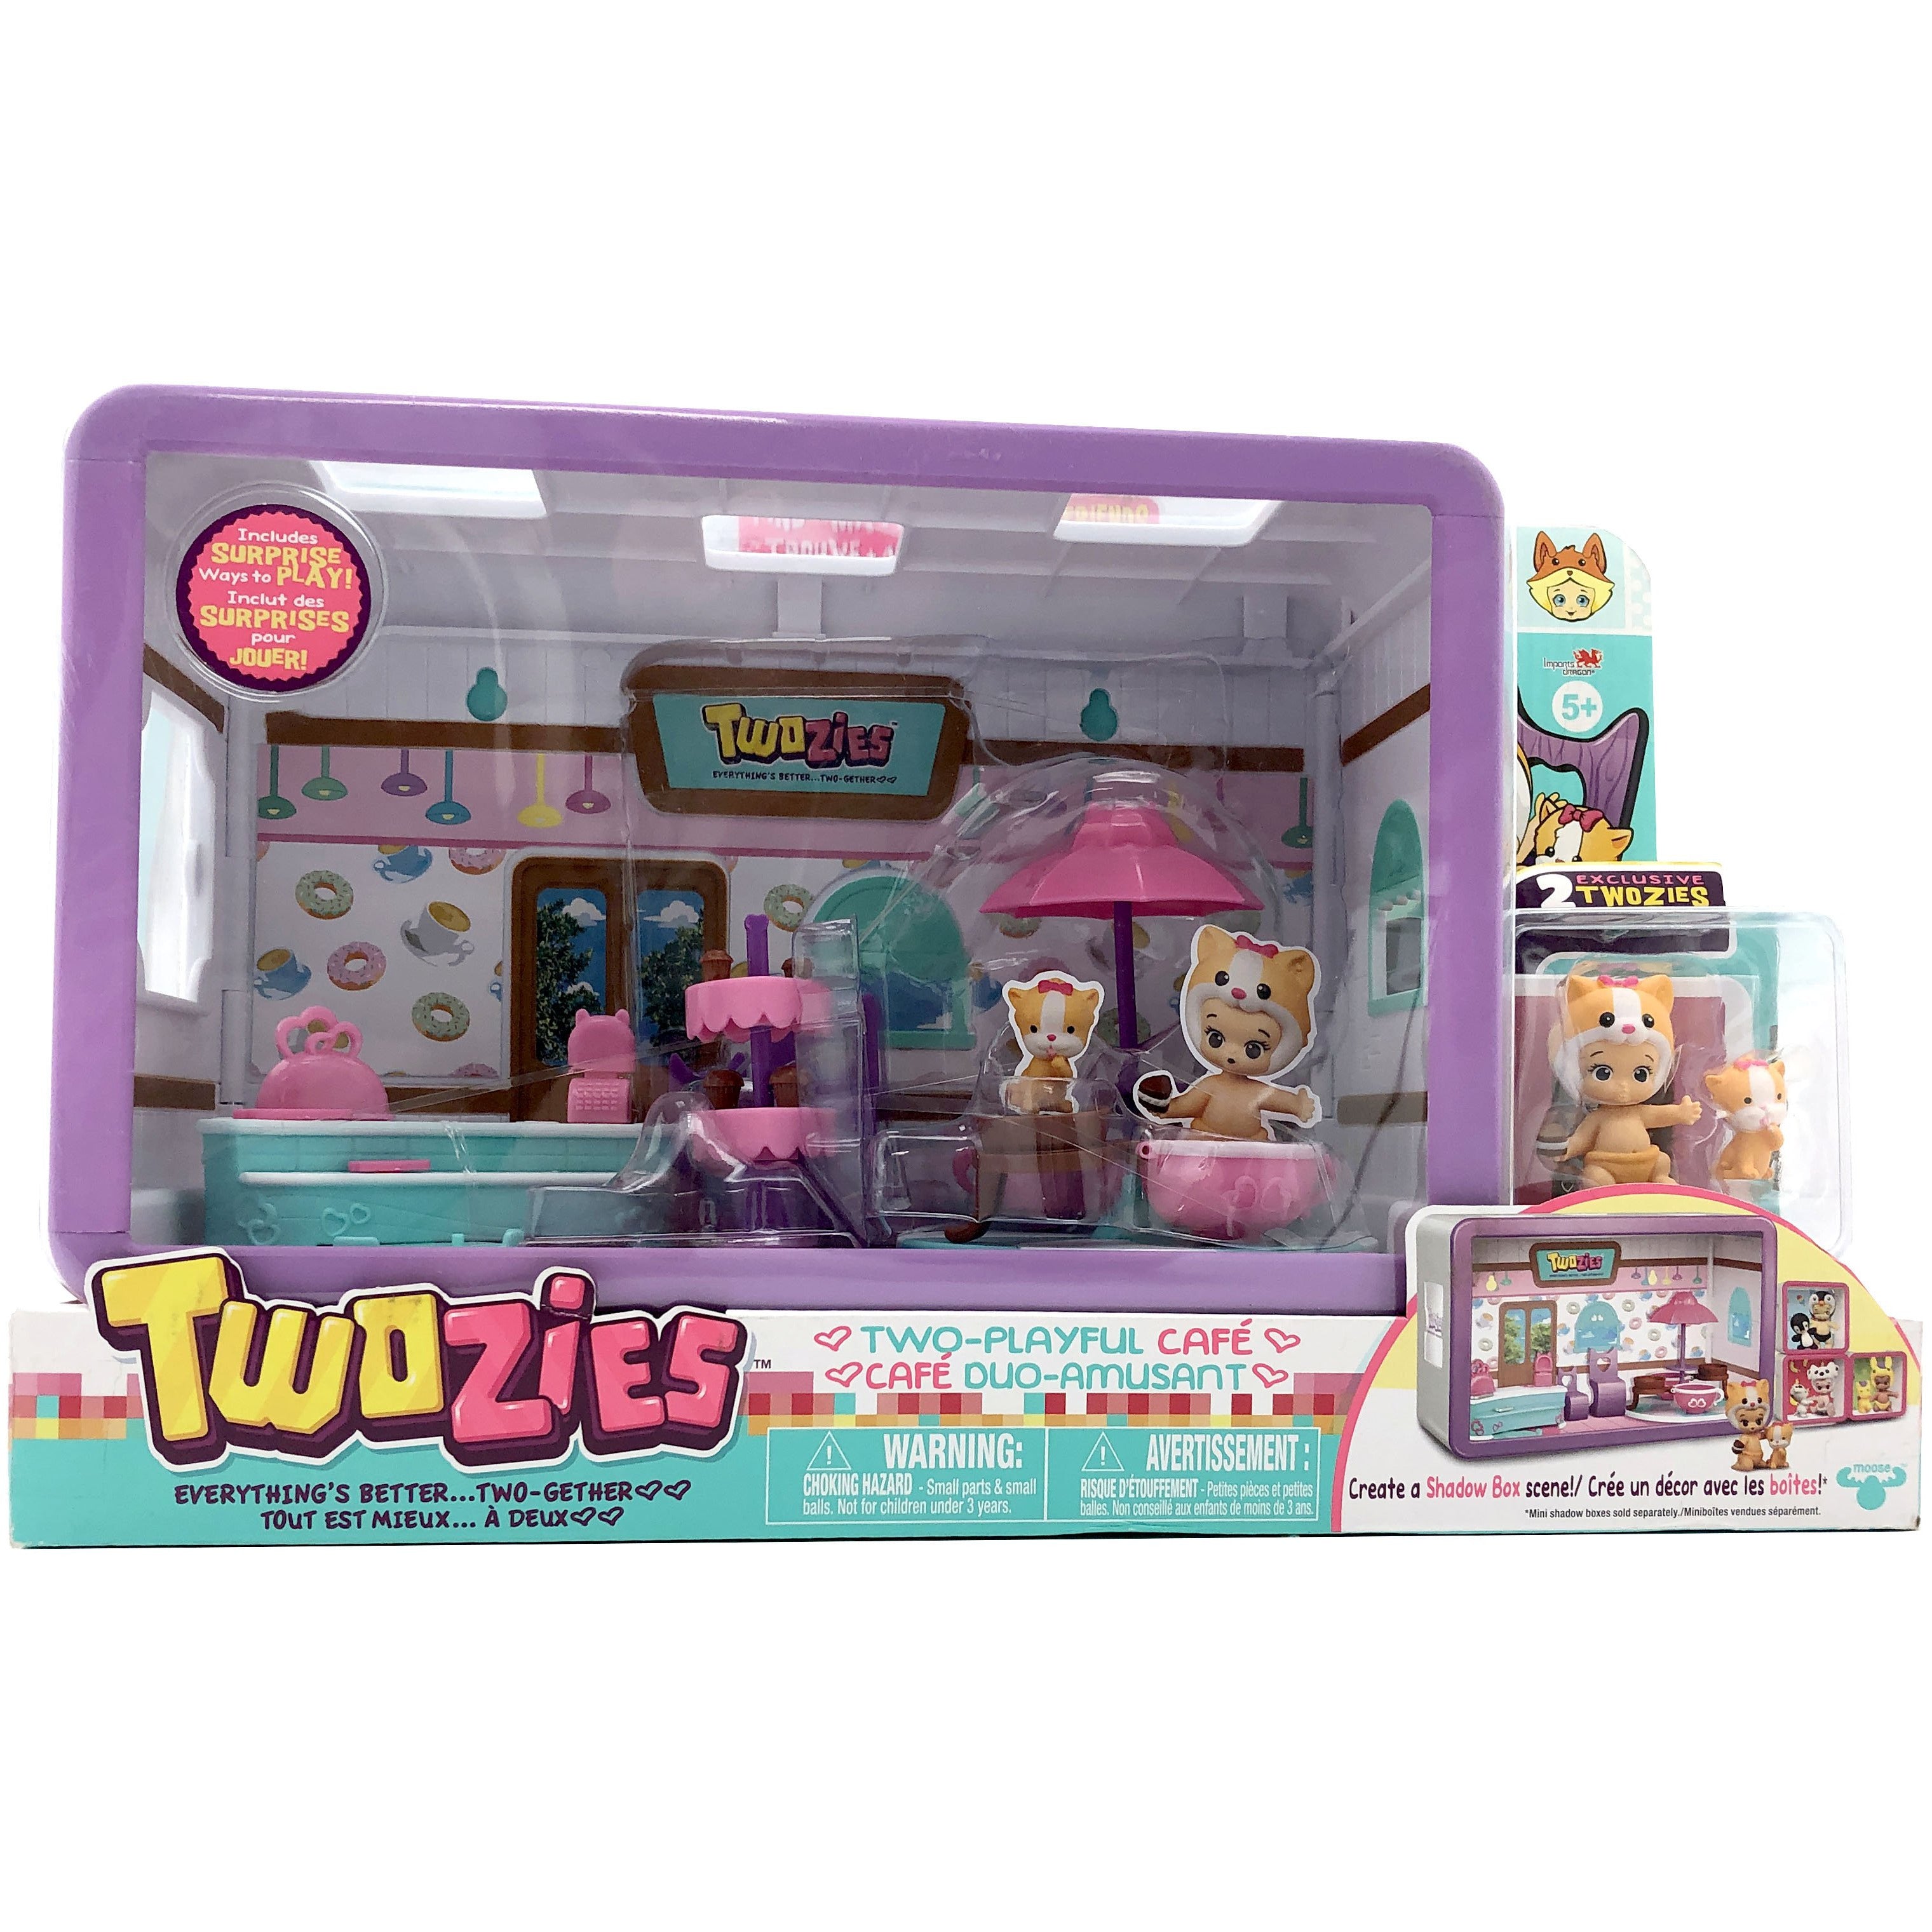 Twozies Two-Playful Cafe / Exclusive Baby and Pet / Pretend play / Kids Toy / Ages 5+